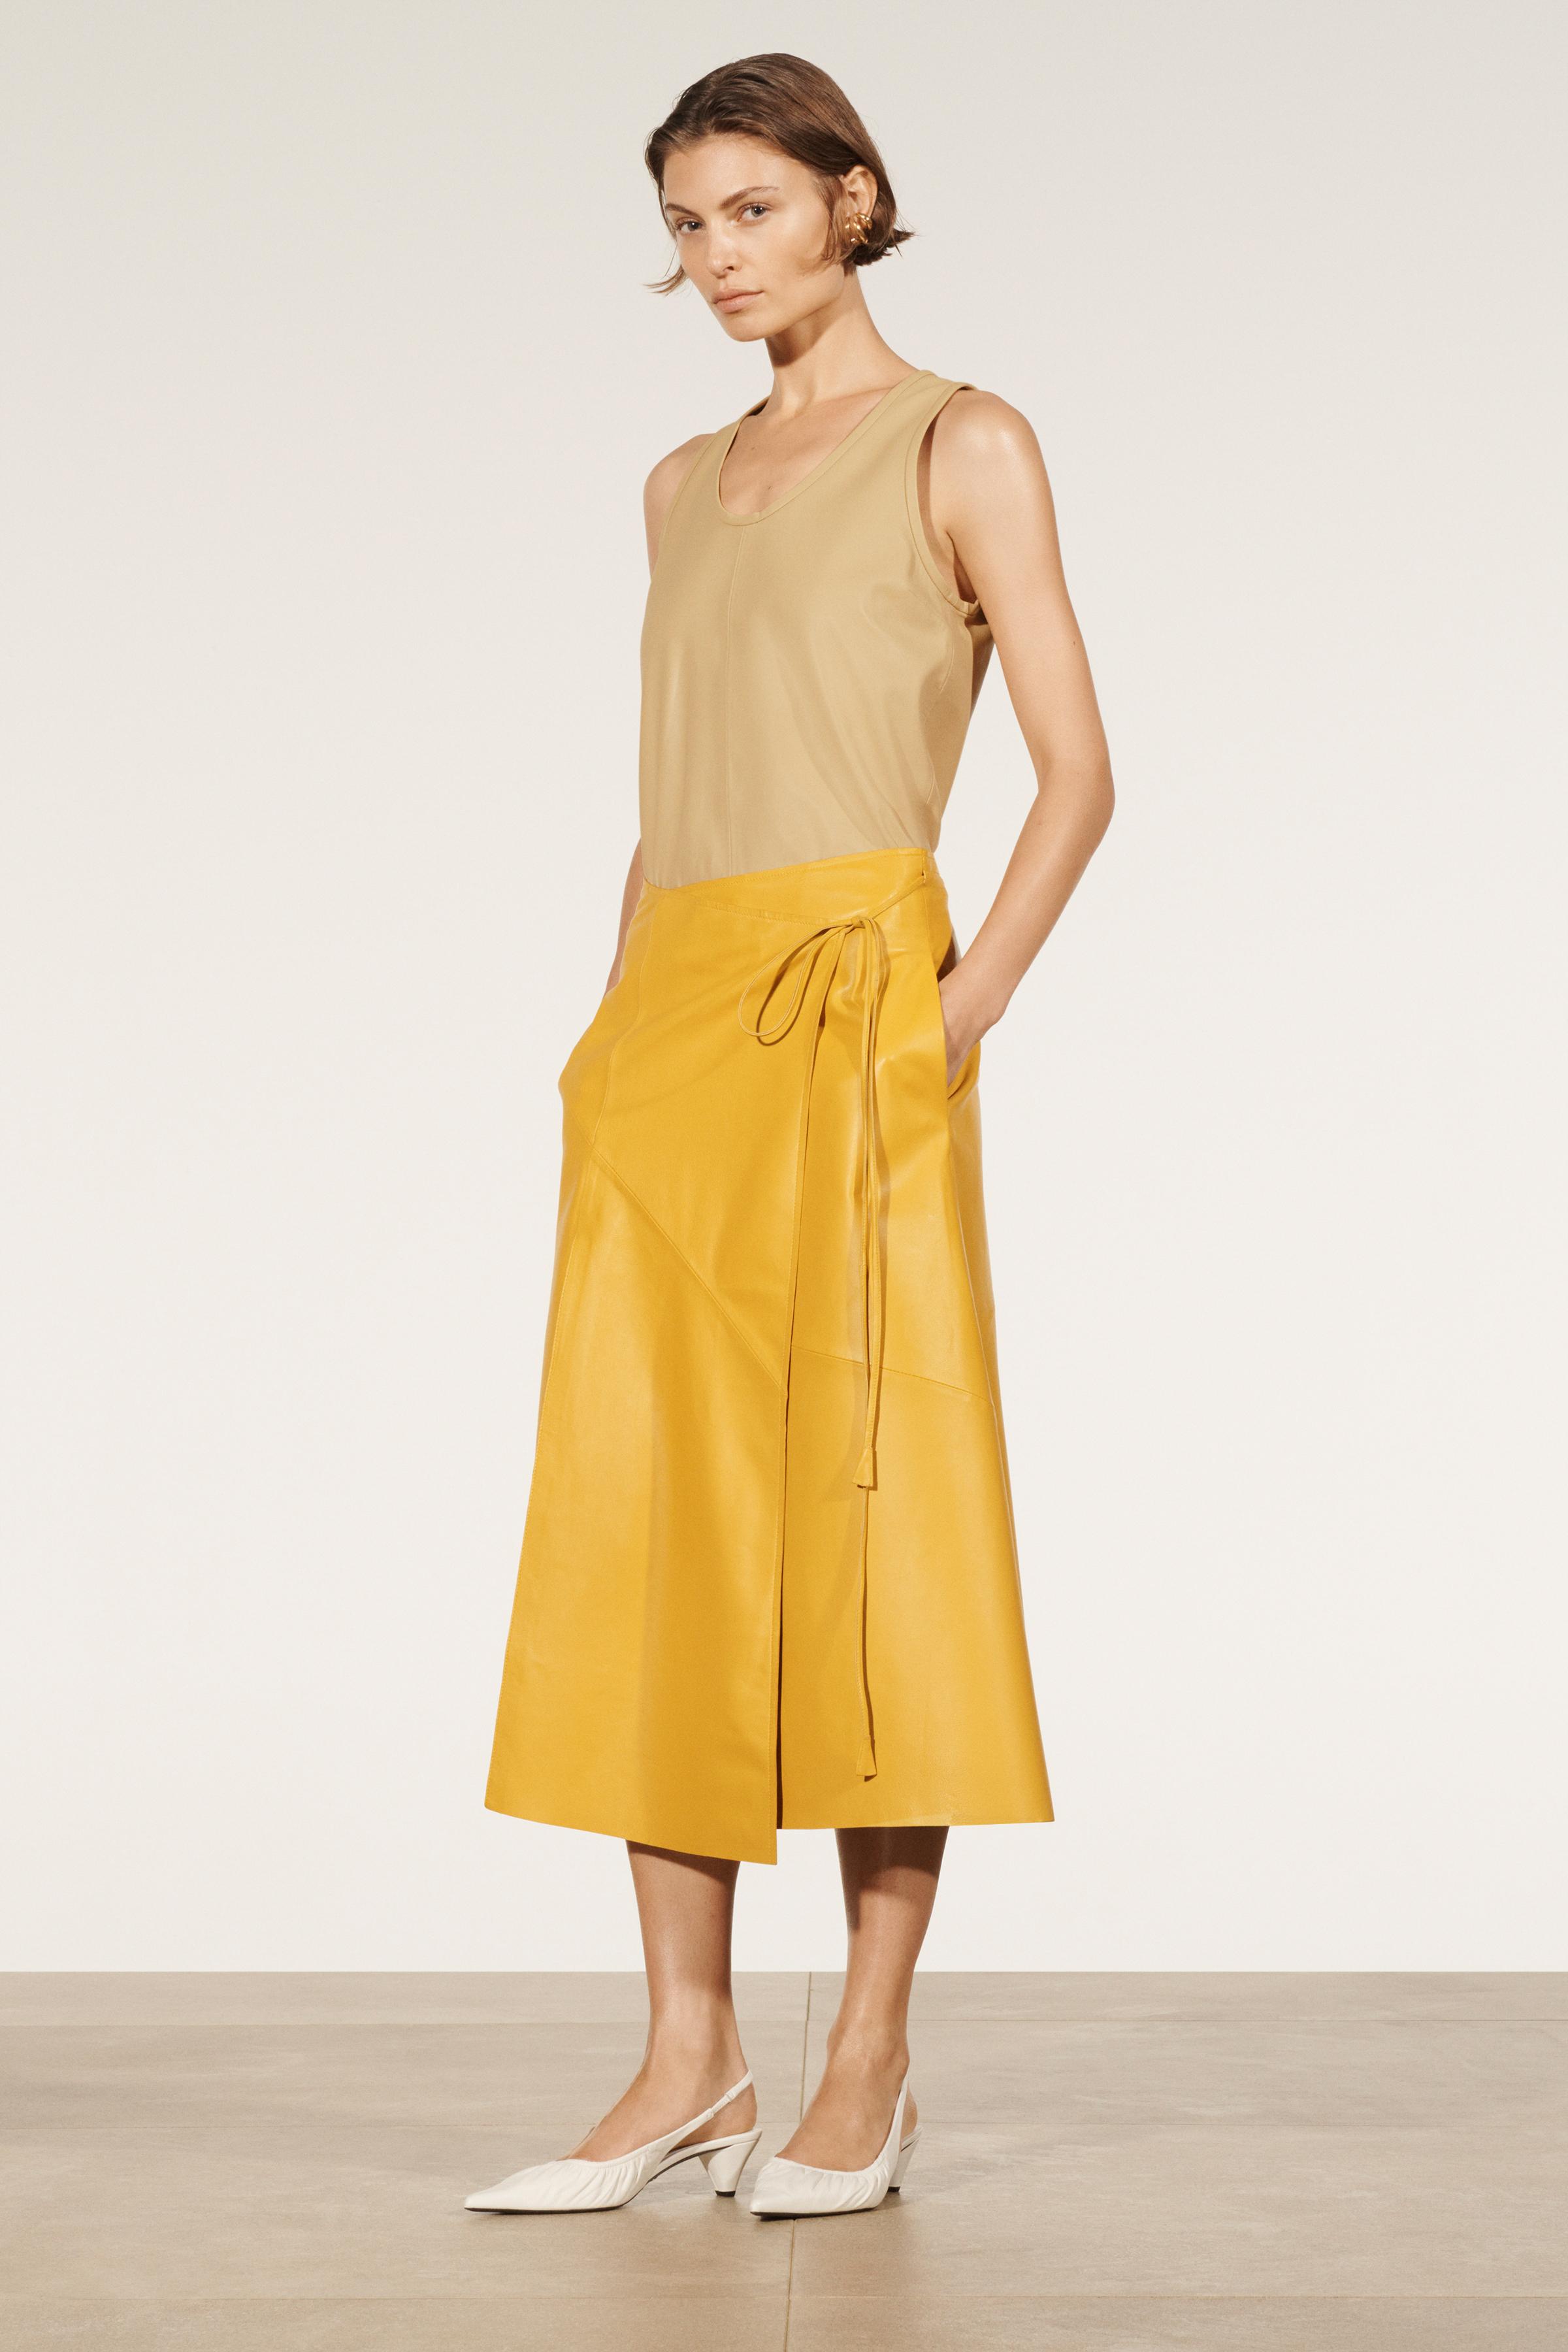 LEATHER WRAP SKIRT LIMITED EDITION - Yellow